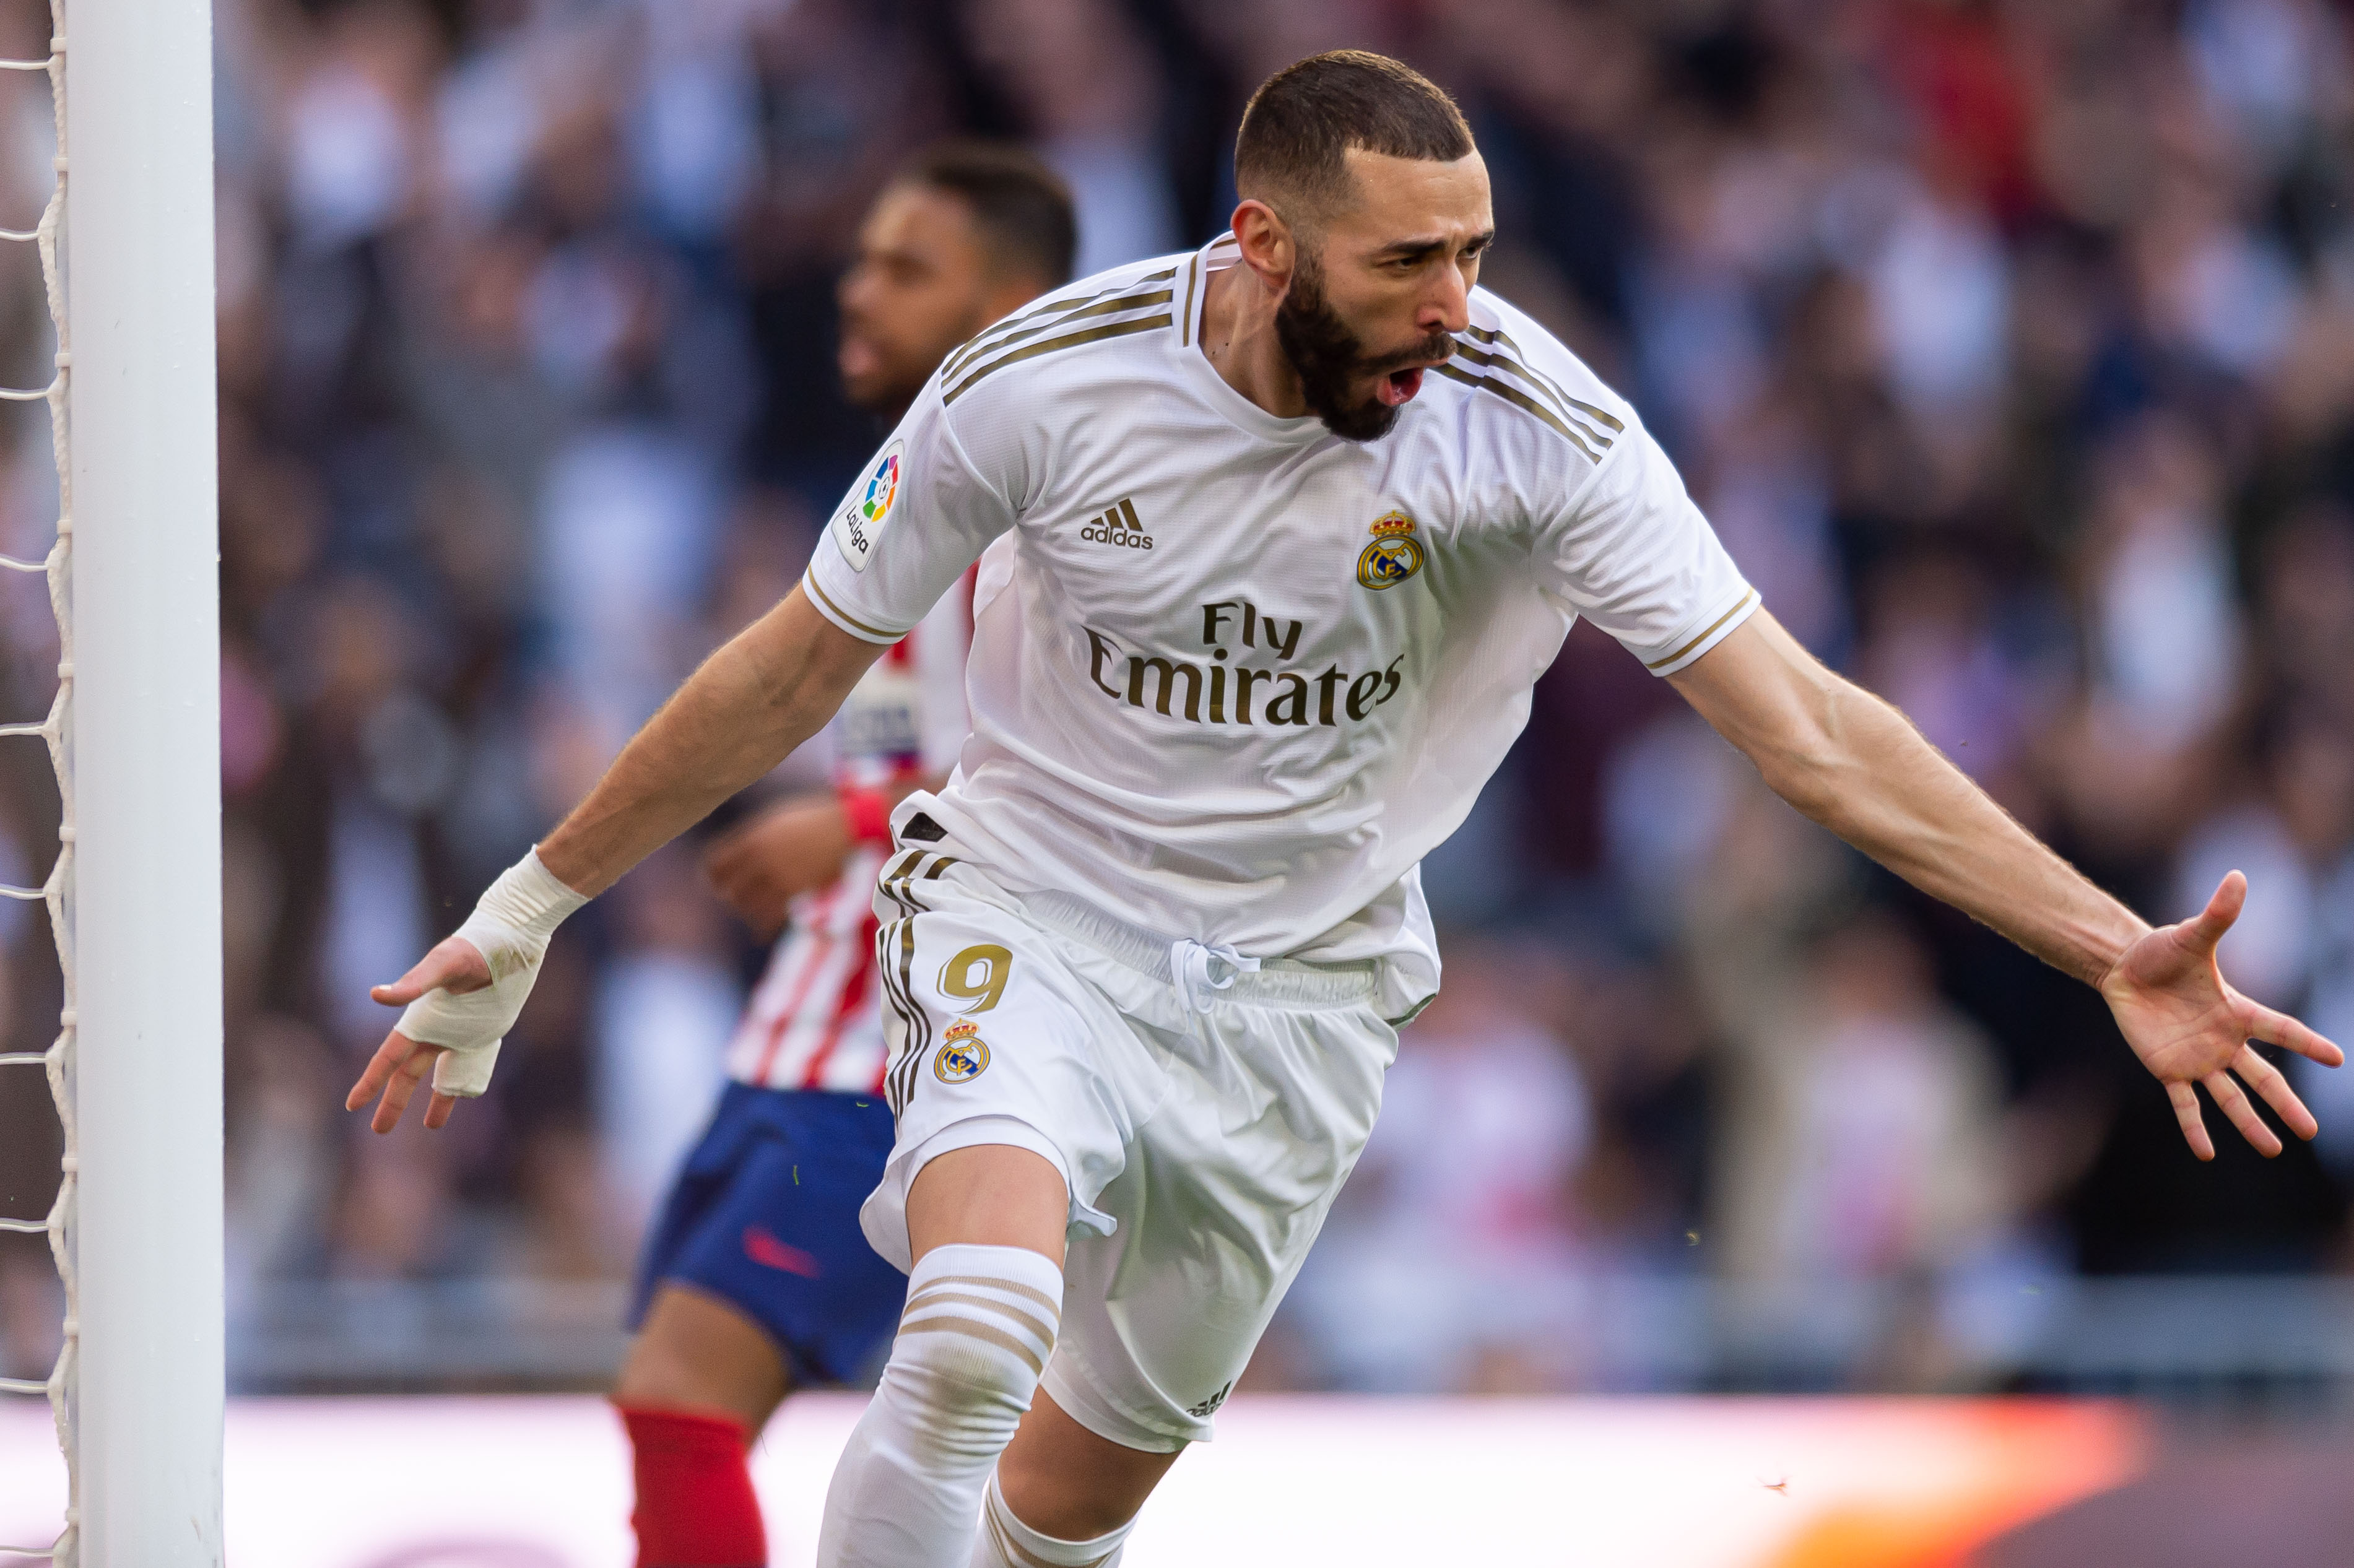 Karim Benzema celebrates after scoring for Real Madrid against Atletico in February 2020.